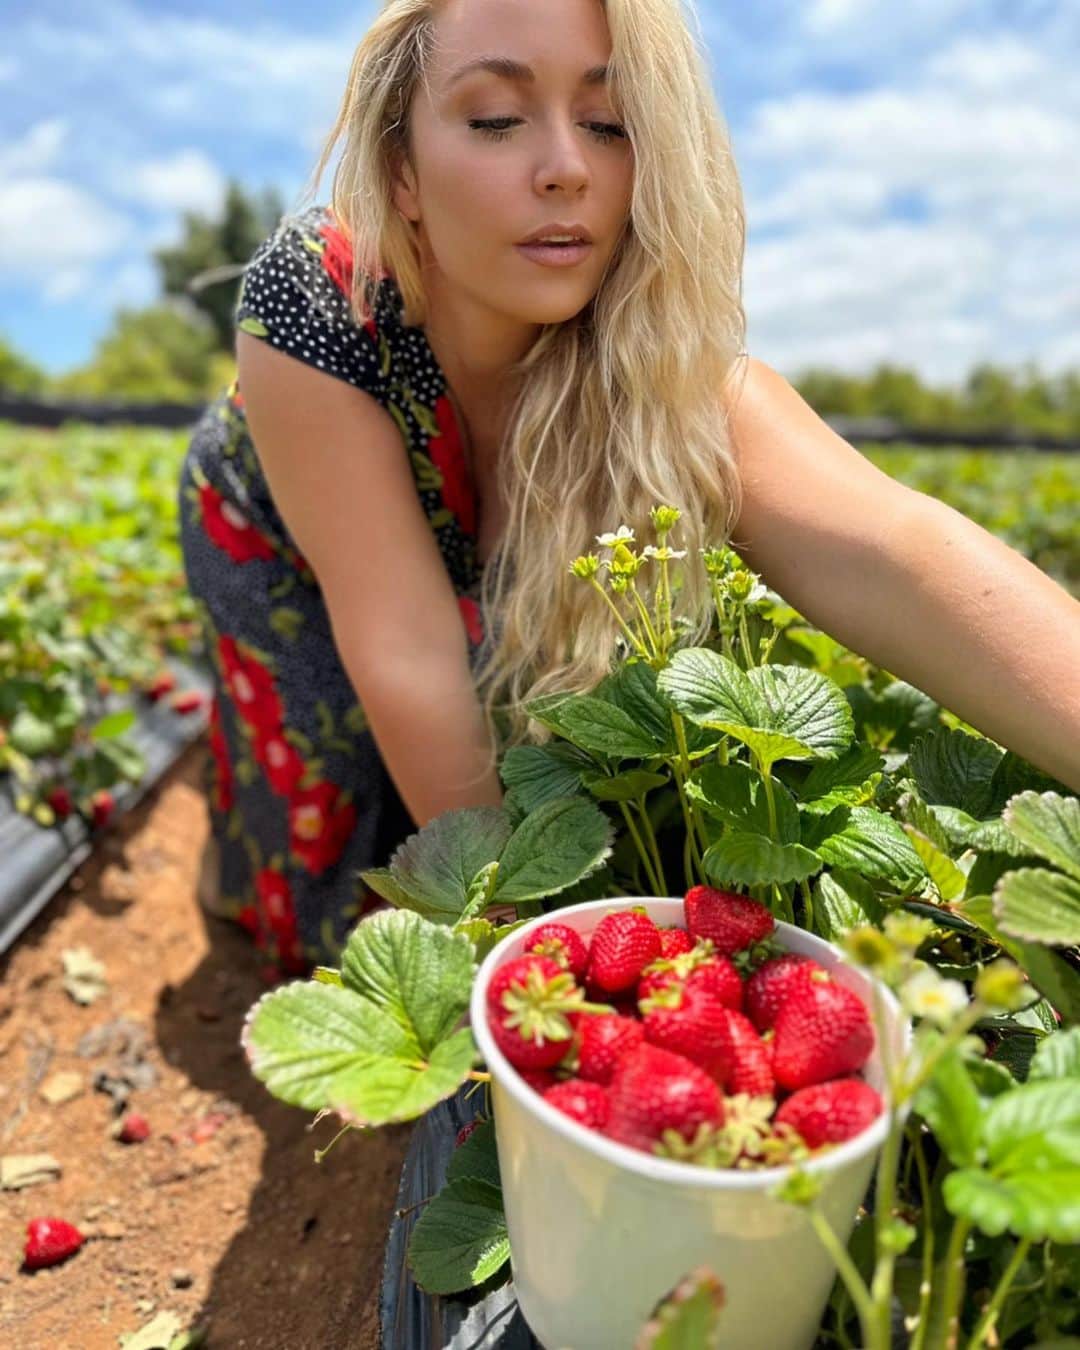 Sydney A Malerのインスタグラム：「Well this was super fun! 10 pounds of strawberries later 😂I’ve made strawberry “cookies”, a cobbler, gummies, a complicated syrup to add to basically any & all beverages (which tastes fantastic) & jam 😂 Pointer if you go strawberry picking, trust me u don’t need as many as u think.」